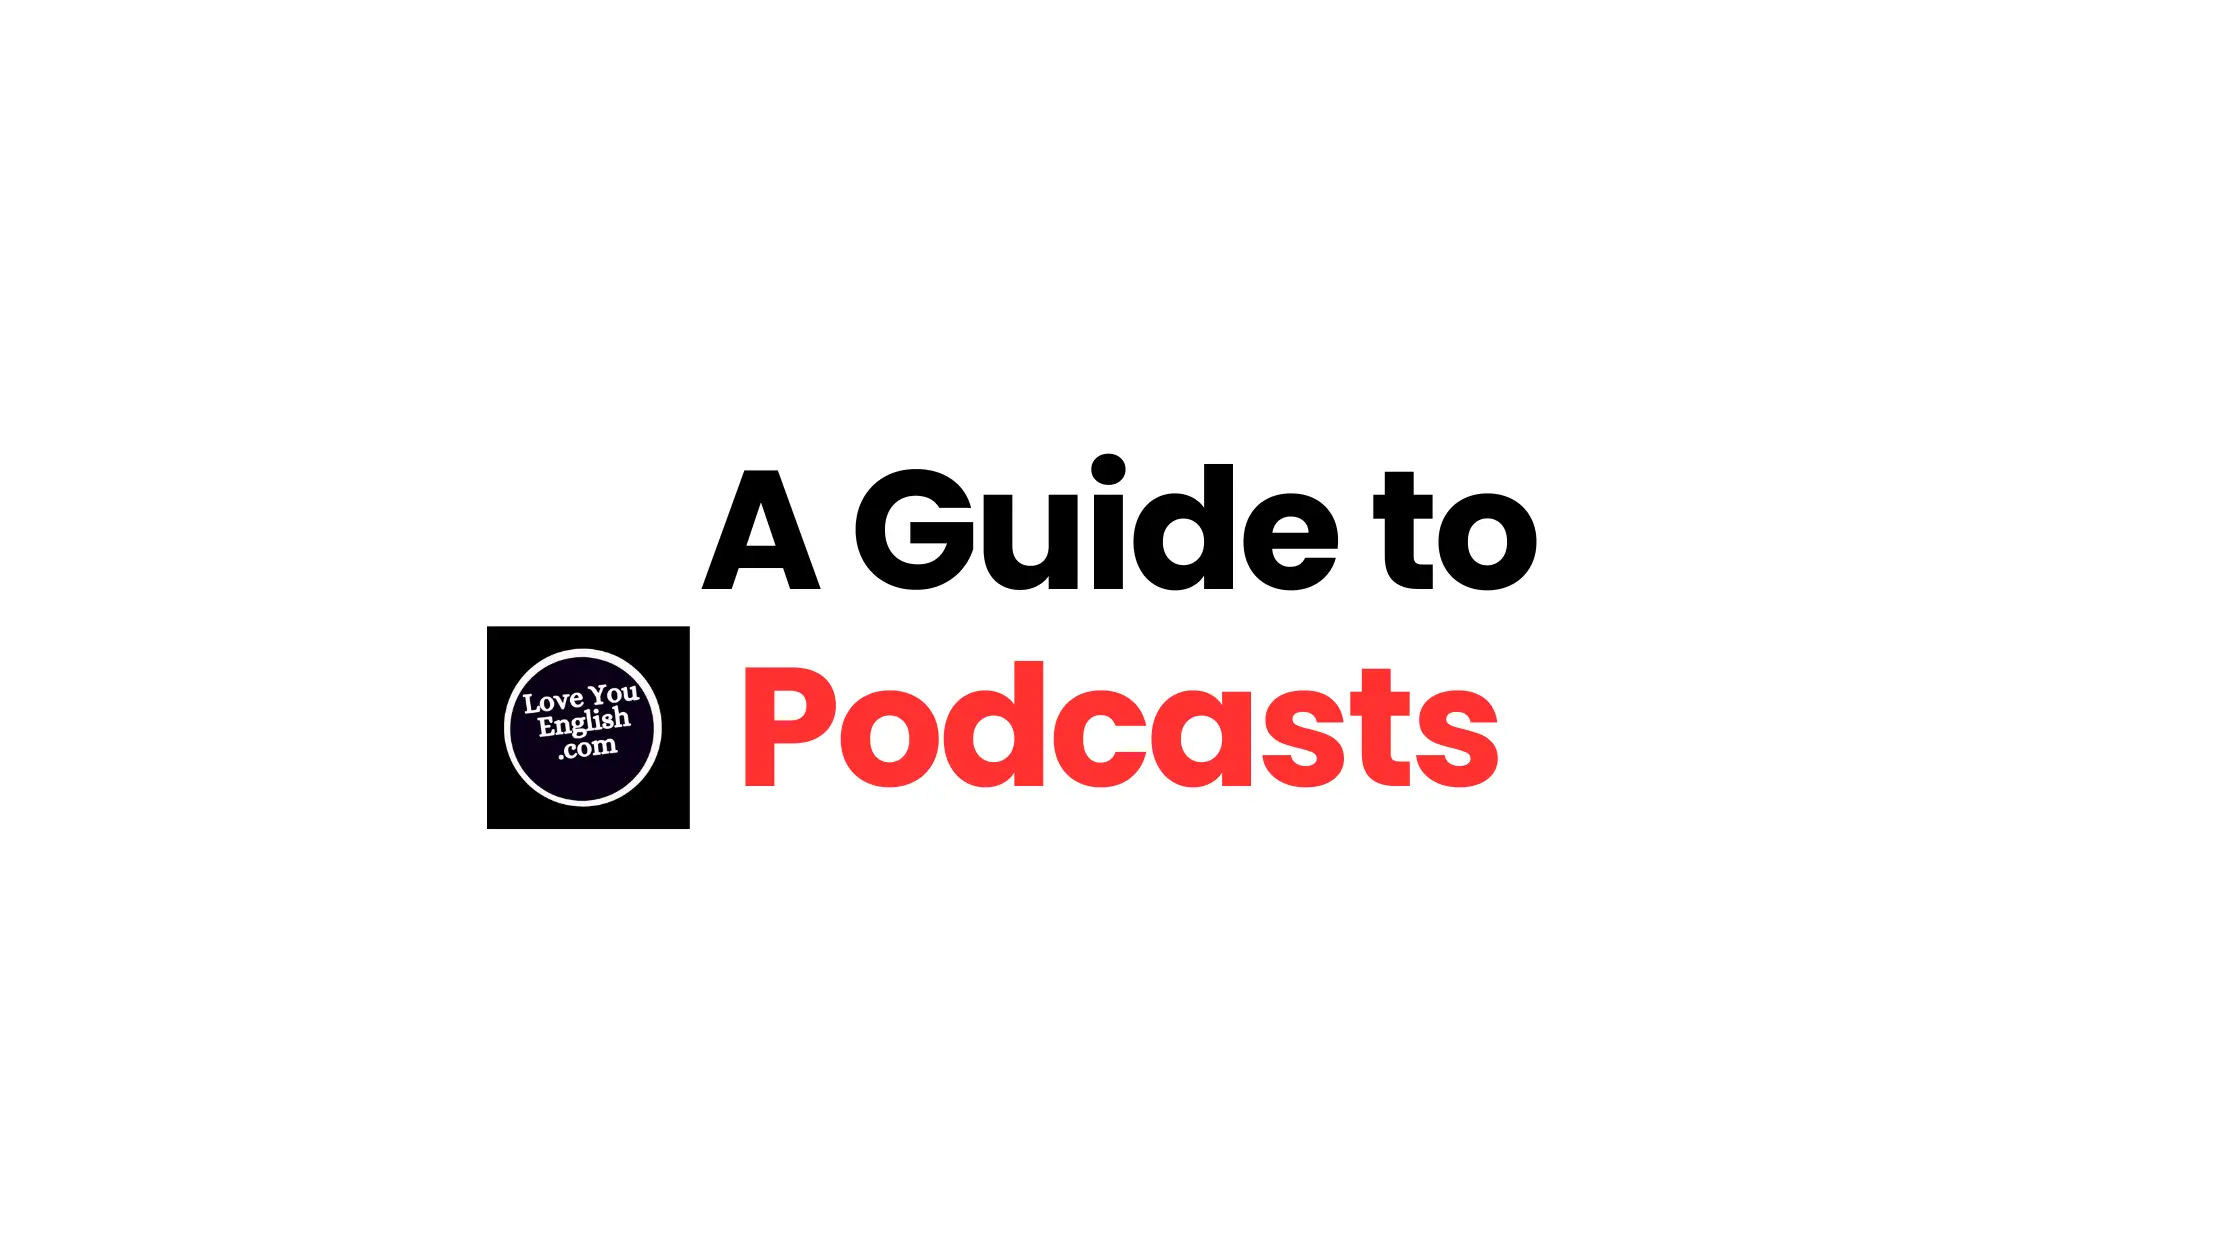 How To Use Podcasts To Learn English